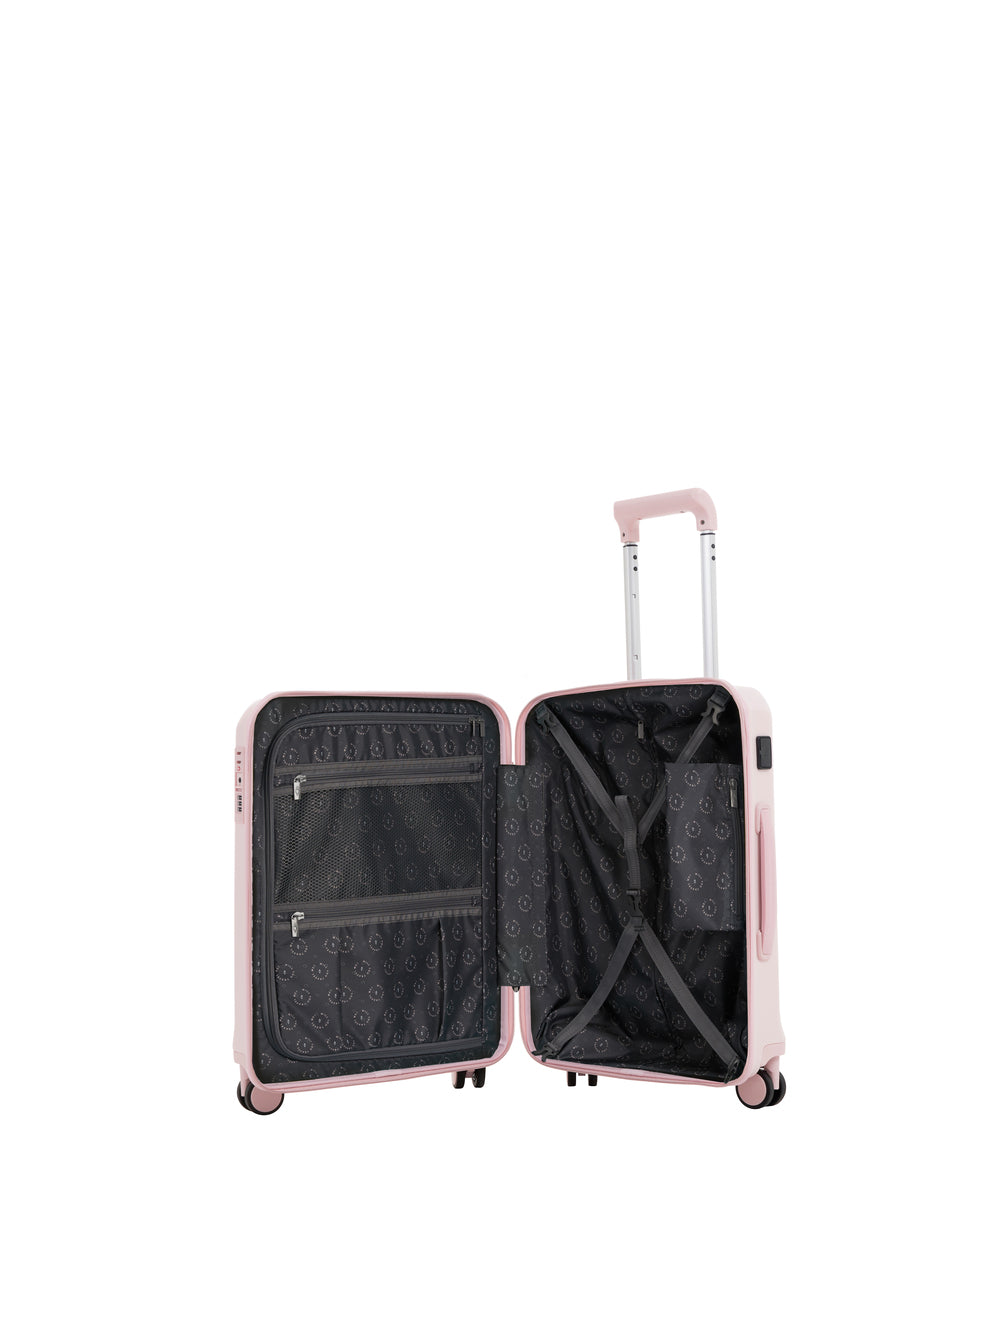 Smart suitcase Small size Sweet Marshmallow HAVE A REST